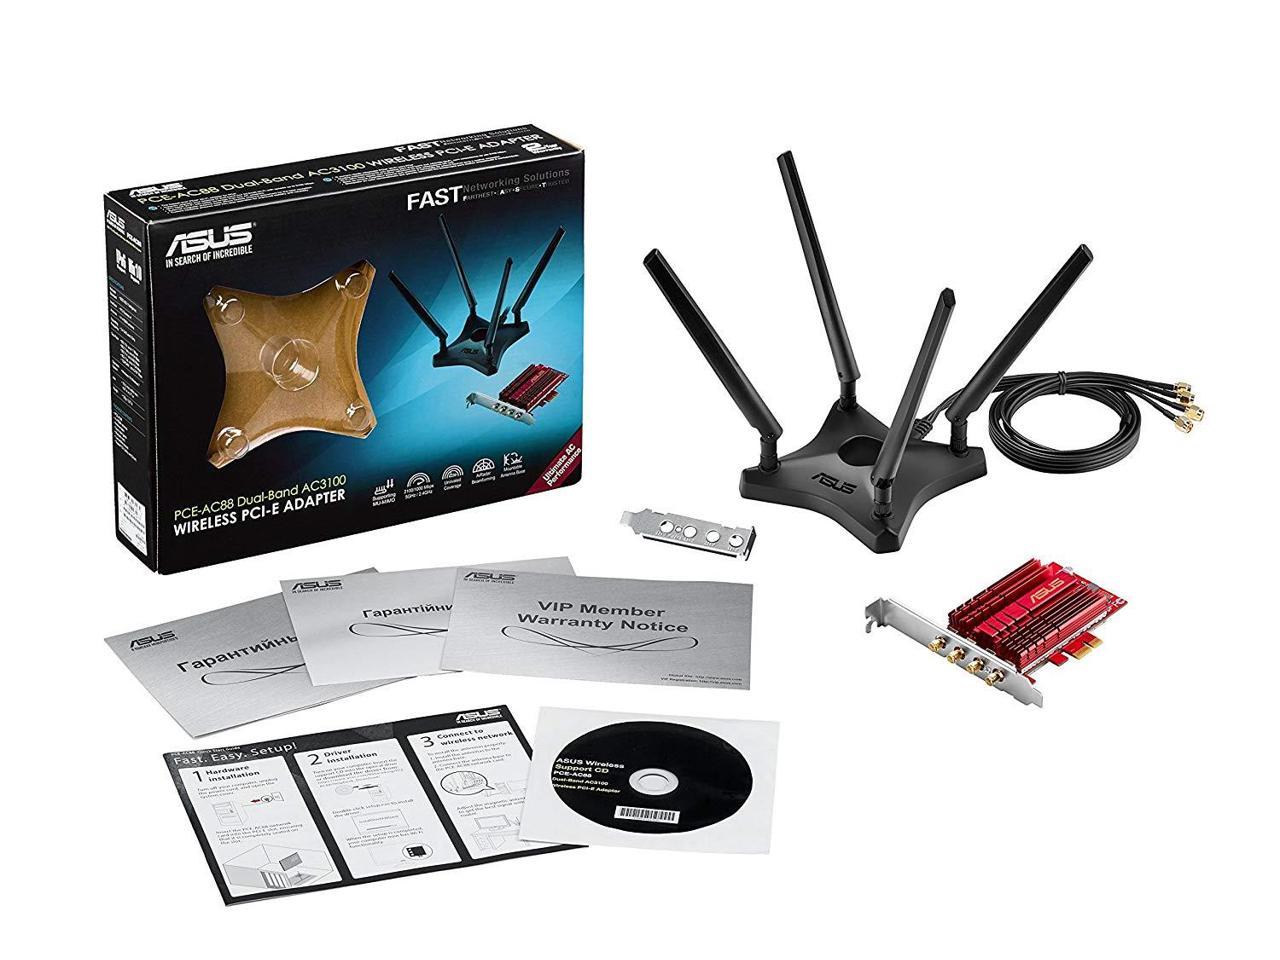 Asus Network PCEAC88/CA AC3100 DualBand Wireless PCI Express Adapter